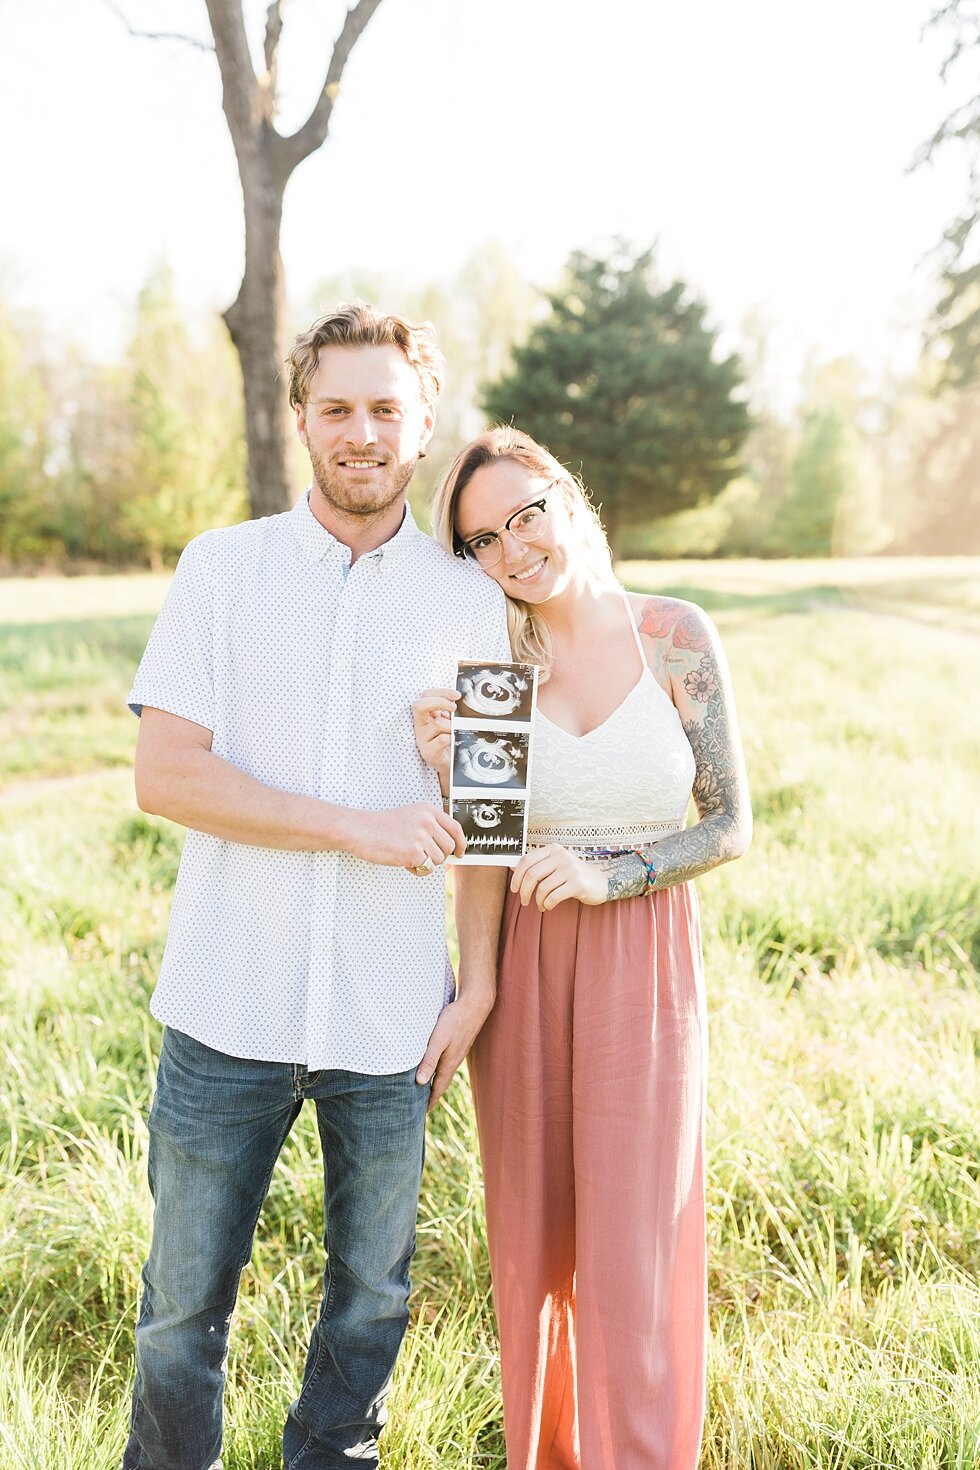  Excitement all around as this southern couple celebrates their new family addition with a spring maternity session. announcement for a southern spring session. couple baby on the way expecting excited maternity photography congratulations announceme